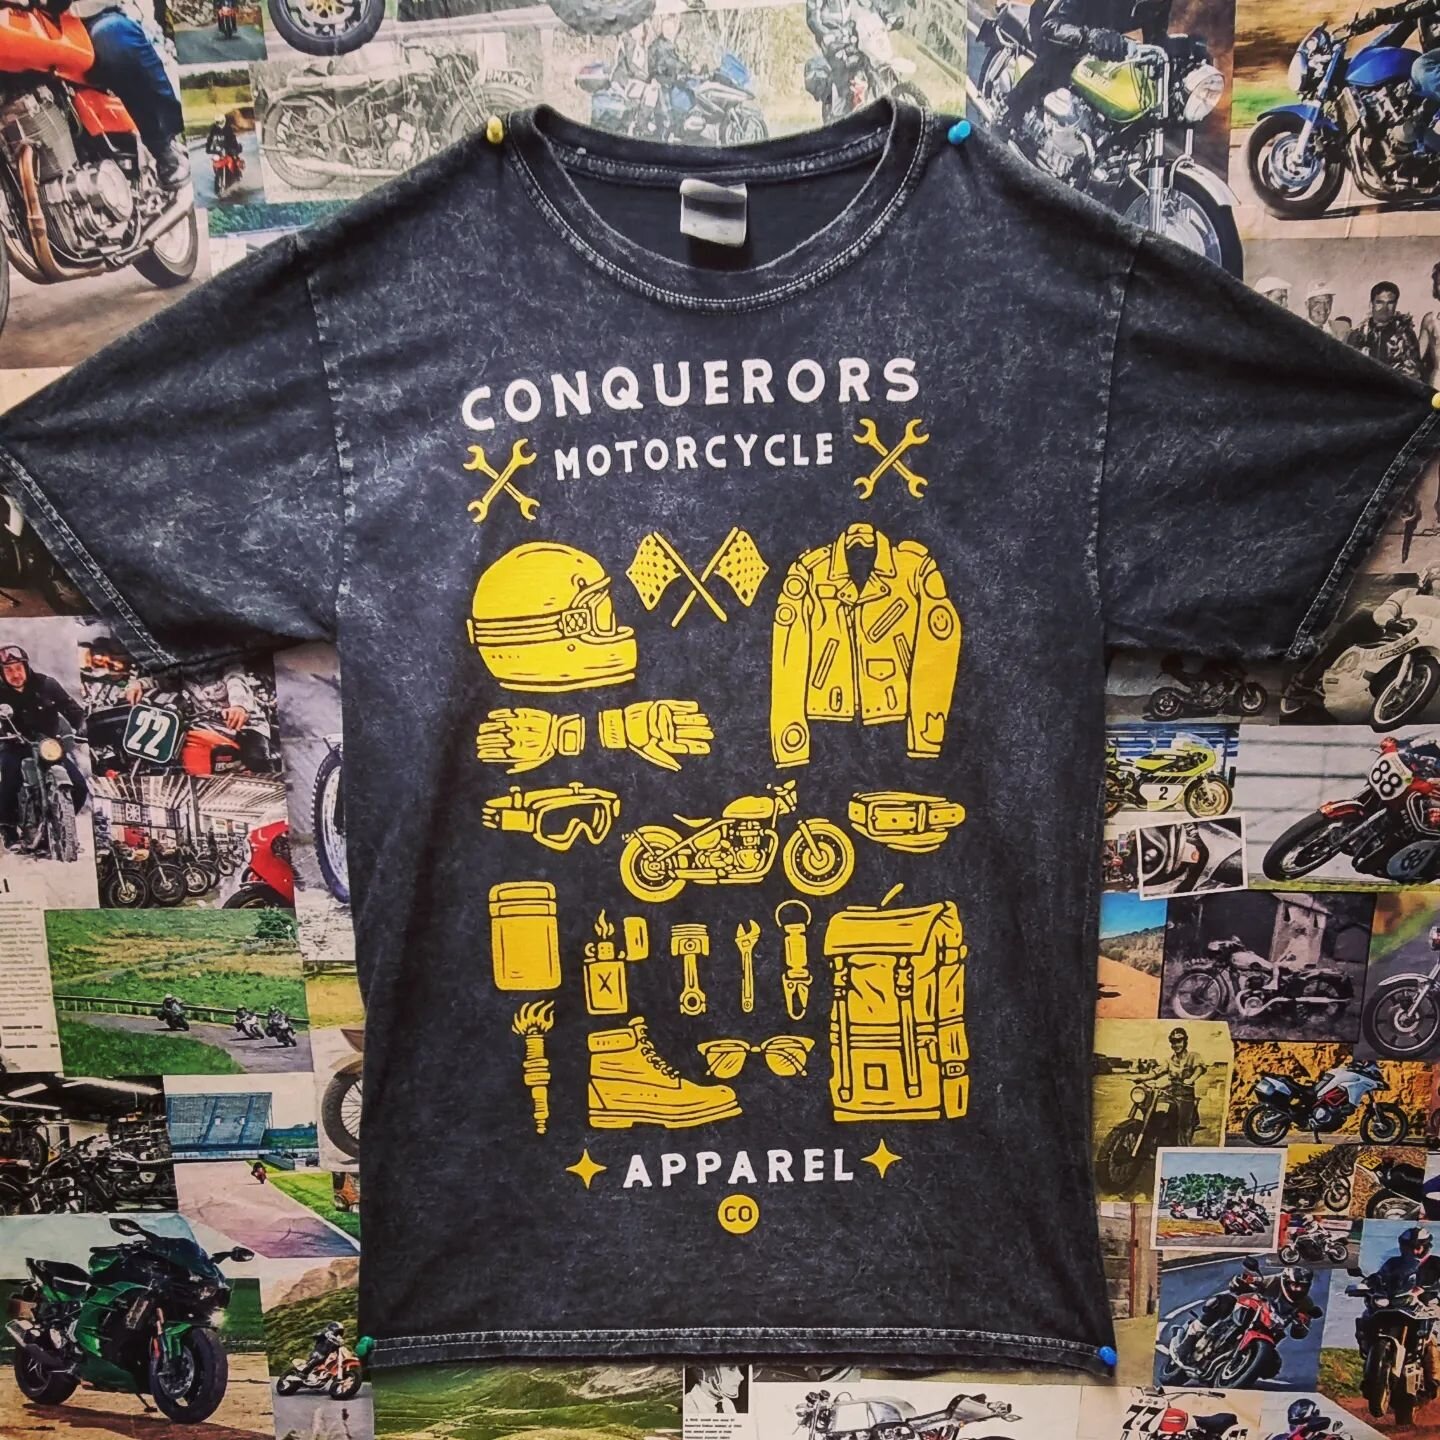 Our new shirt has just dropped on line and instore 🤟

Link in bio 

#conquerorsapparel #motorcycleapparel #motorcycle #smallbusinessuk #t-shirt #positivevibes #postmeetriderepeat #custommade